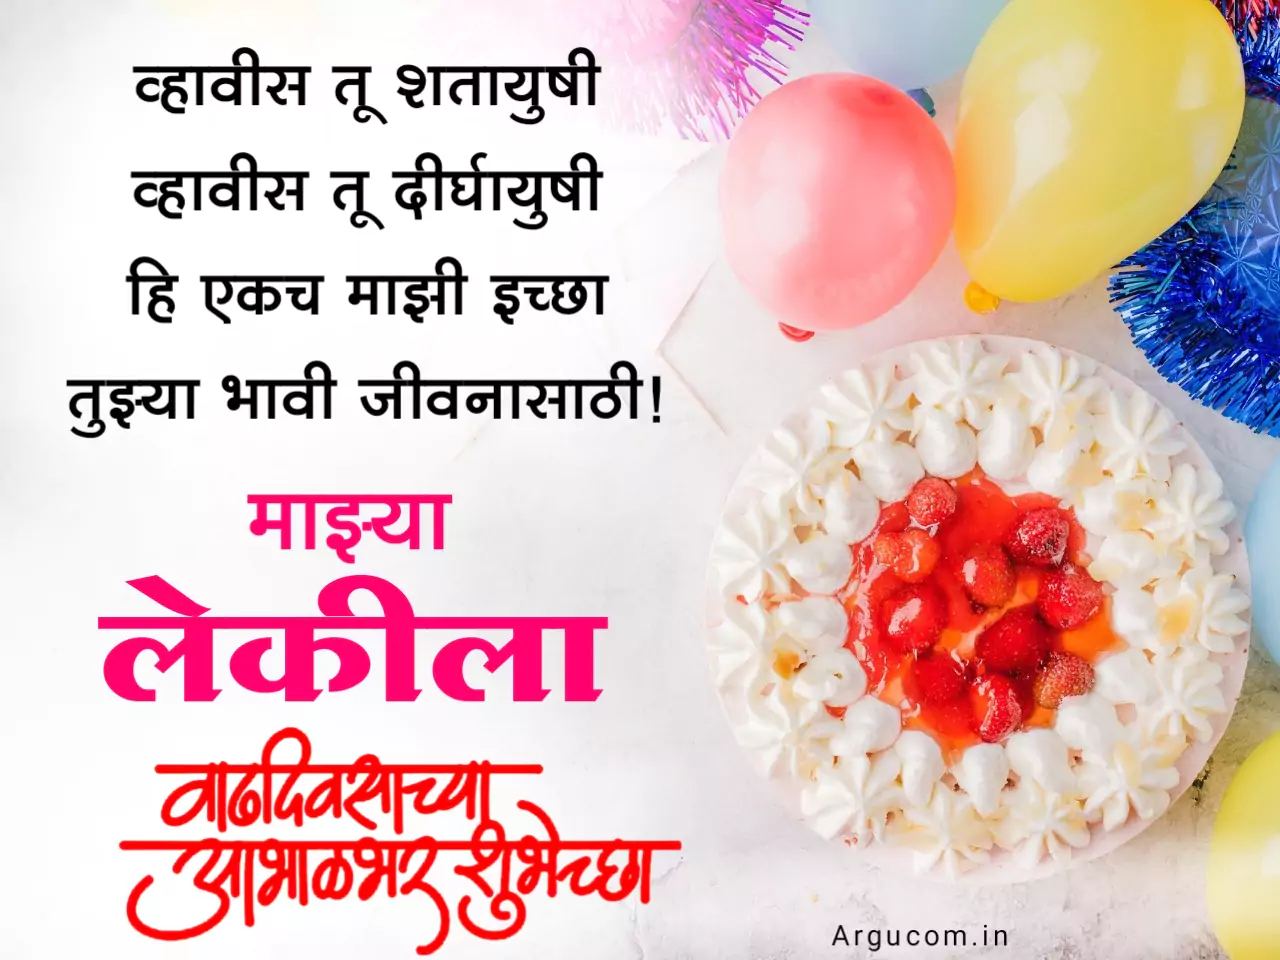 Happy Birthday Image for daughter in marathi